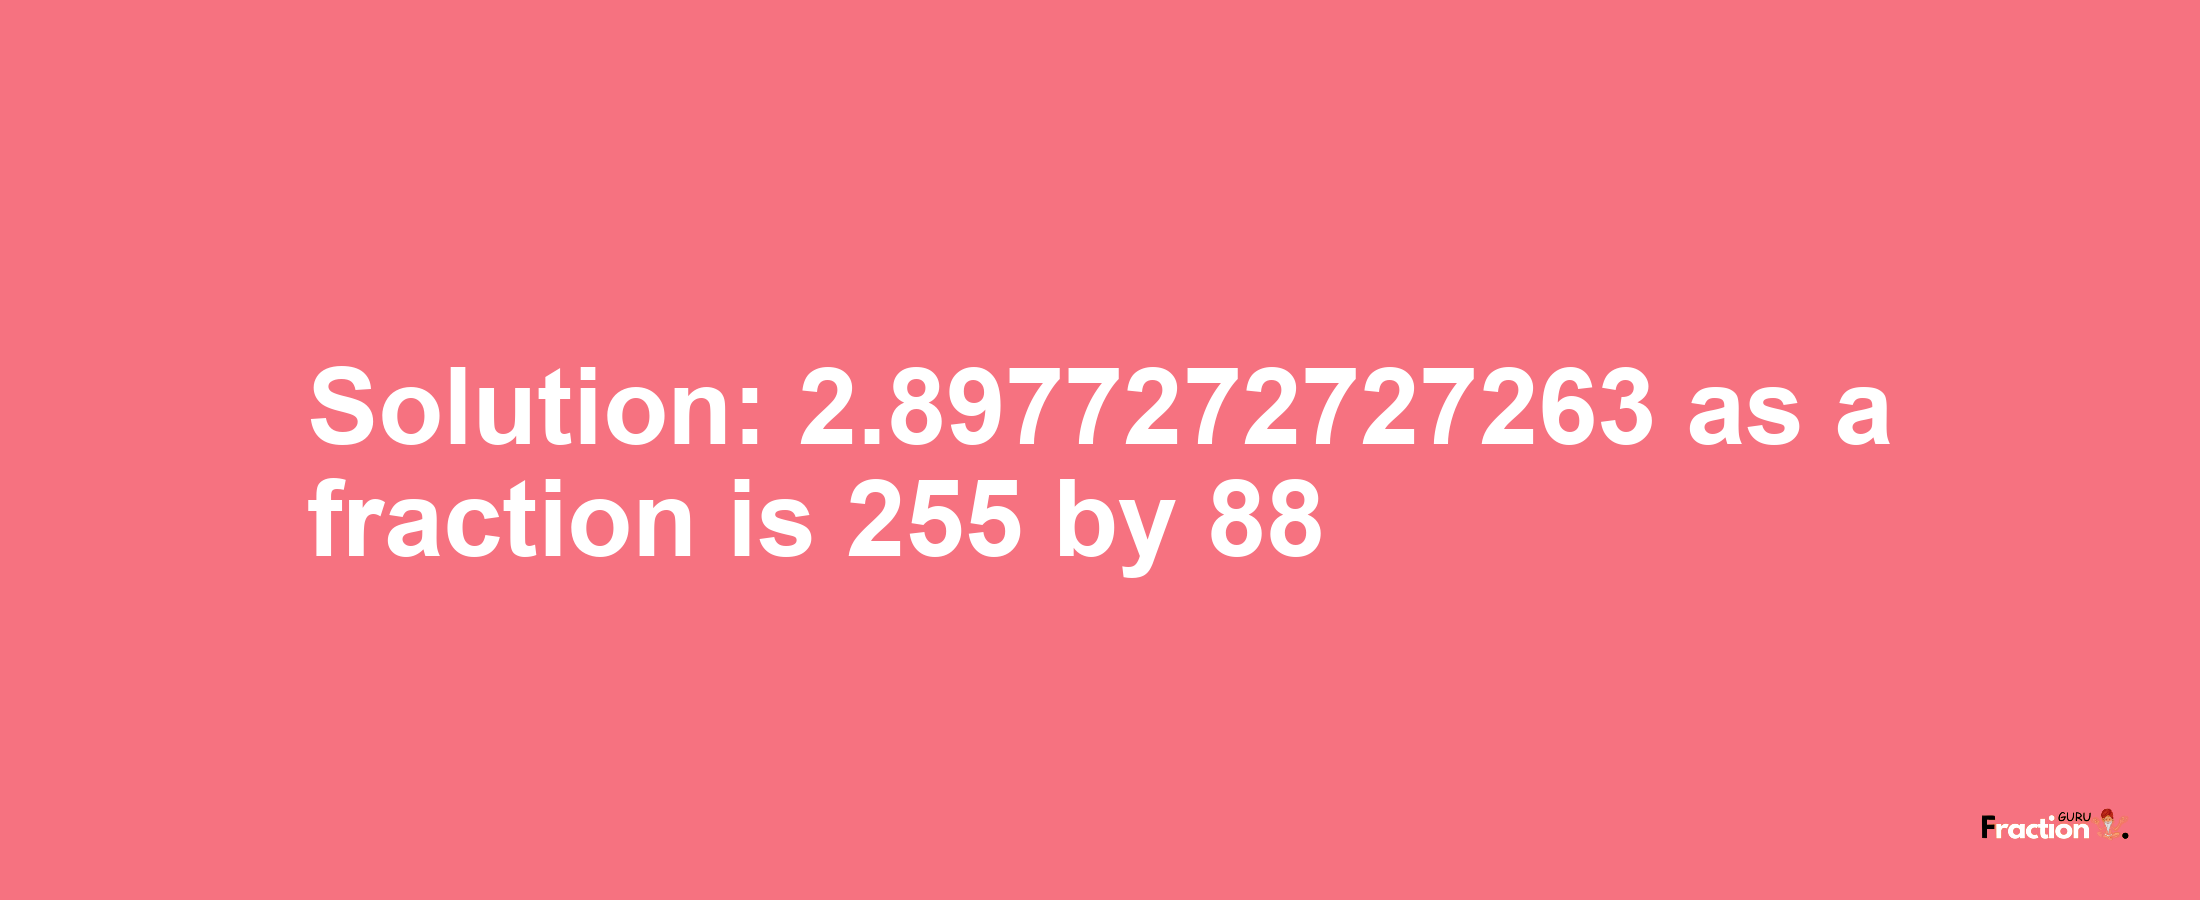 Solution:2.8977272727263 as a fraction is 255/88